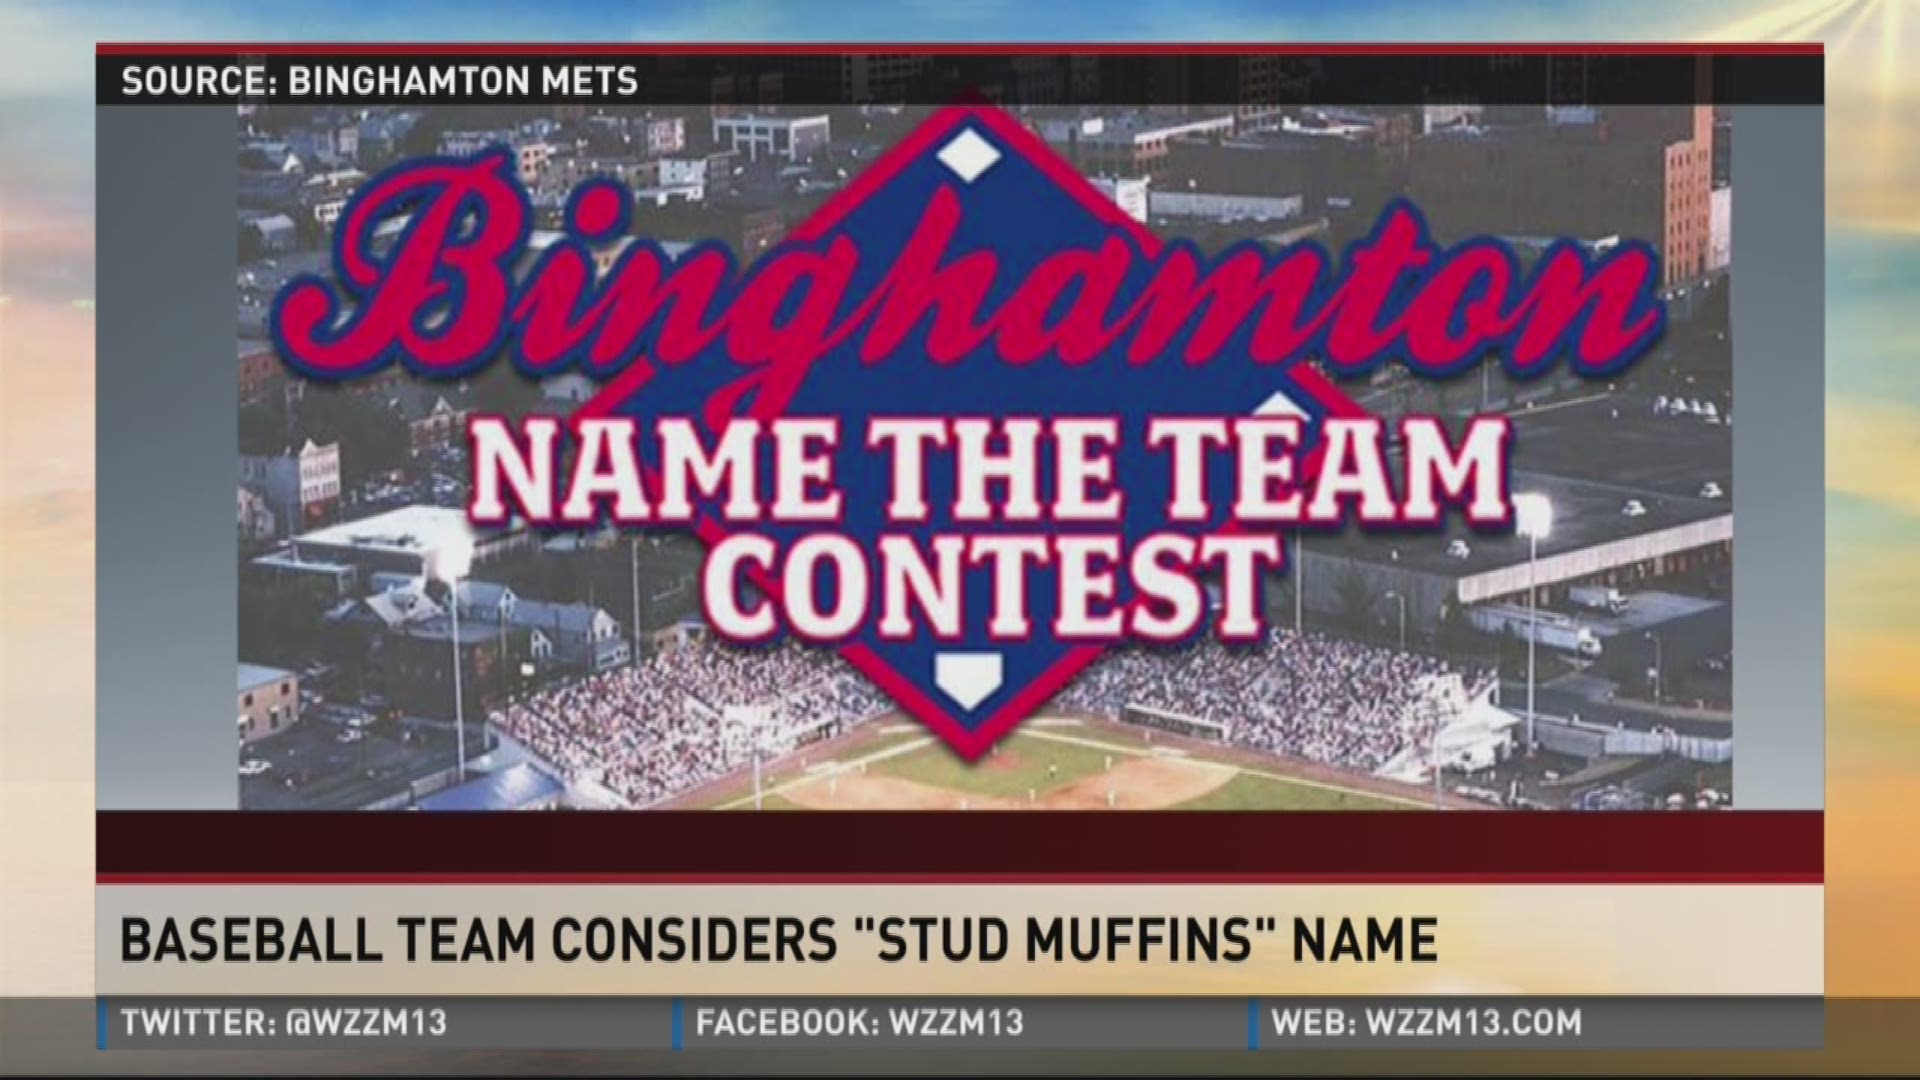 Will the Binghamton Mets Become the Stud Muffins? The Internet Will Decide  - The New York Times